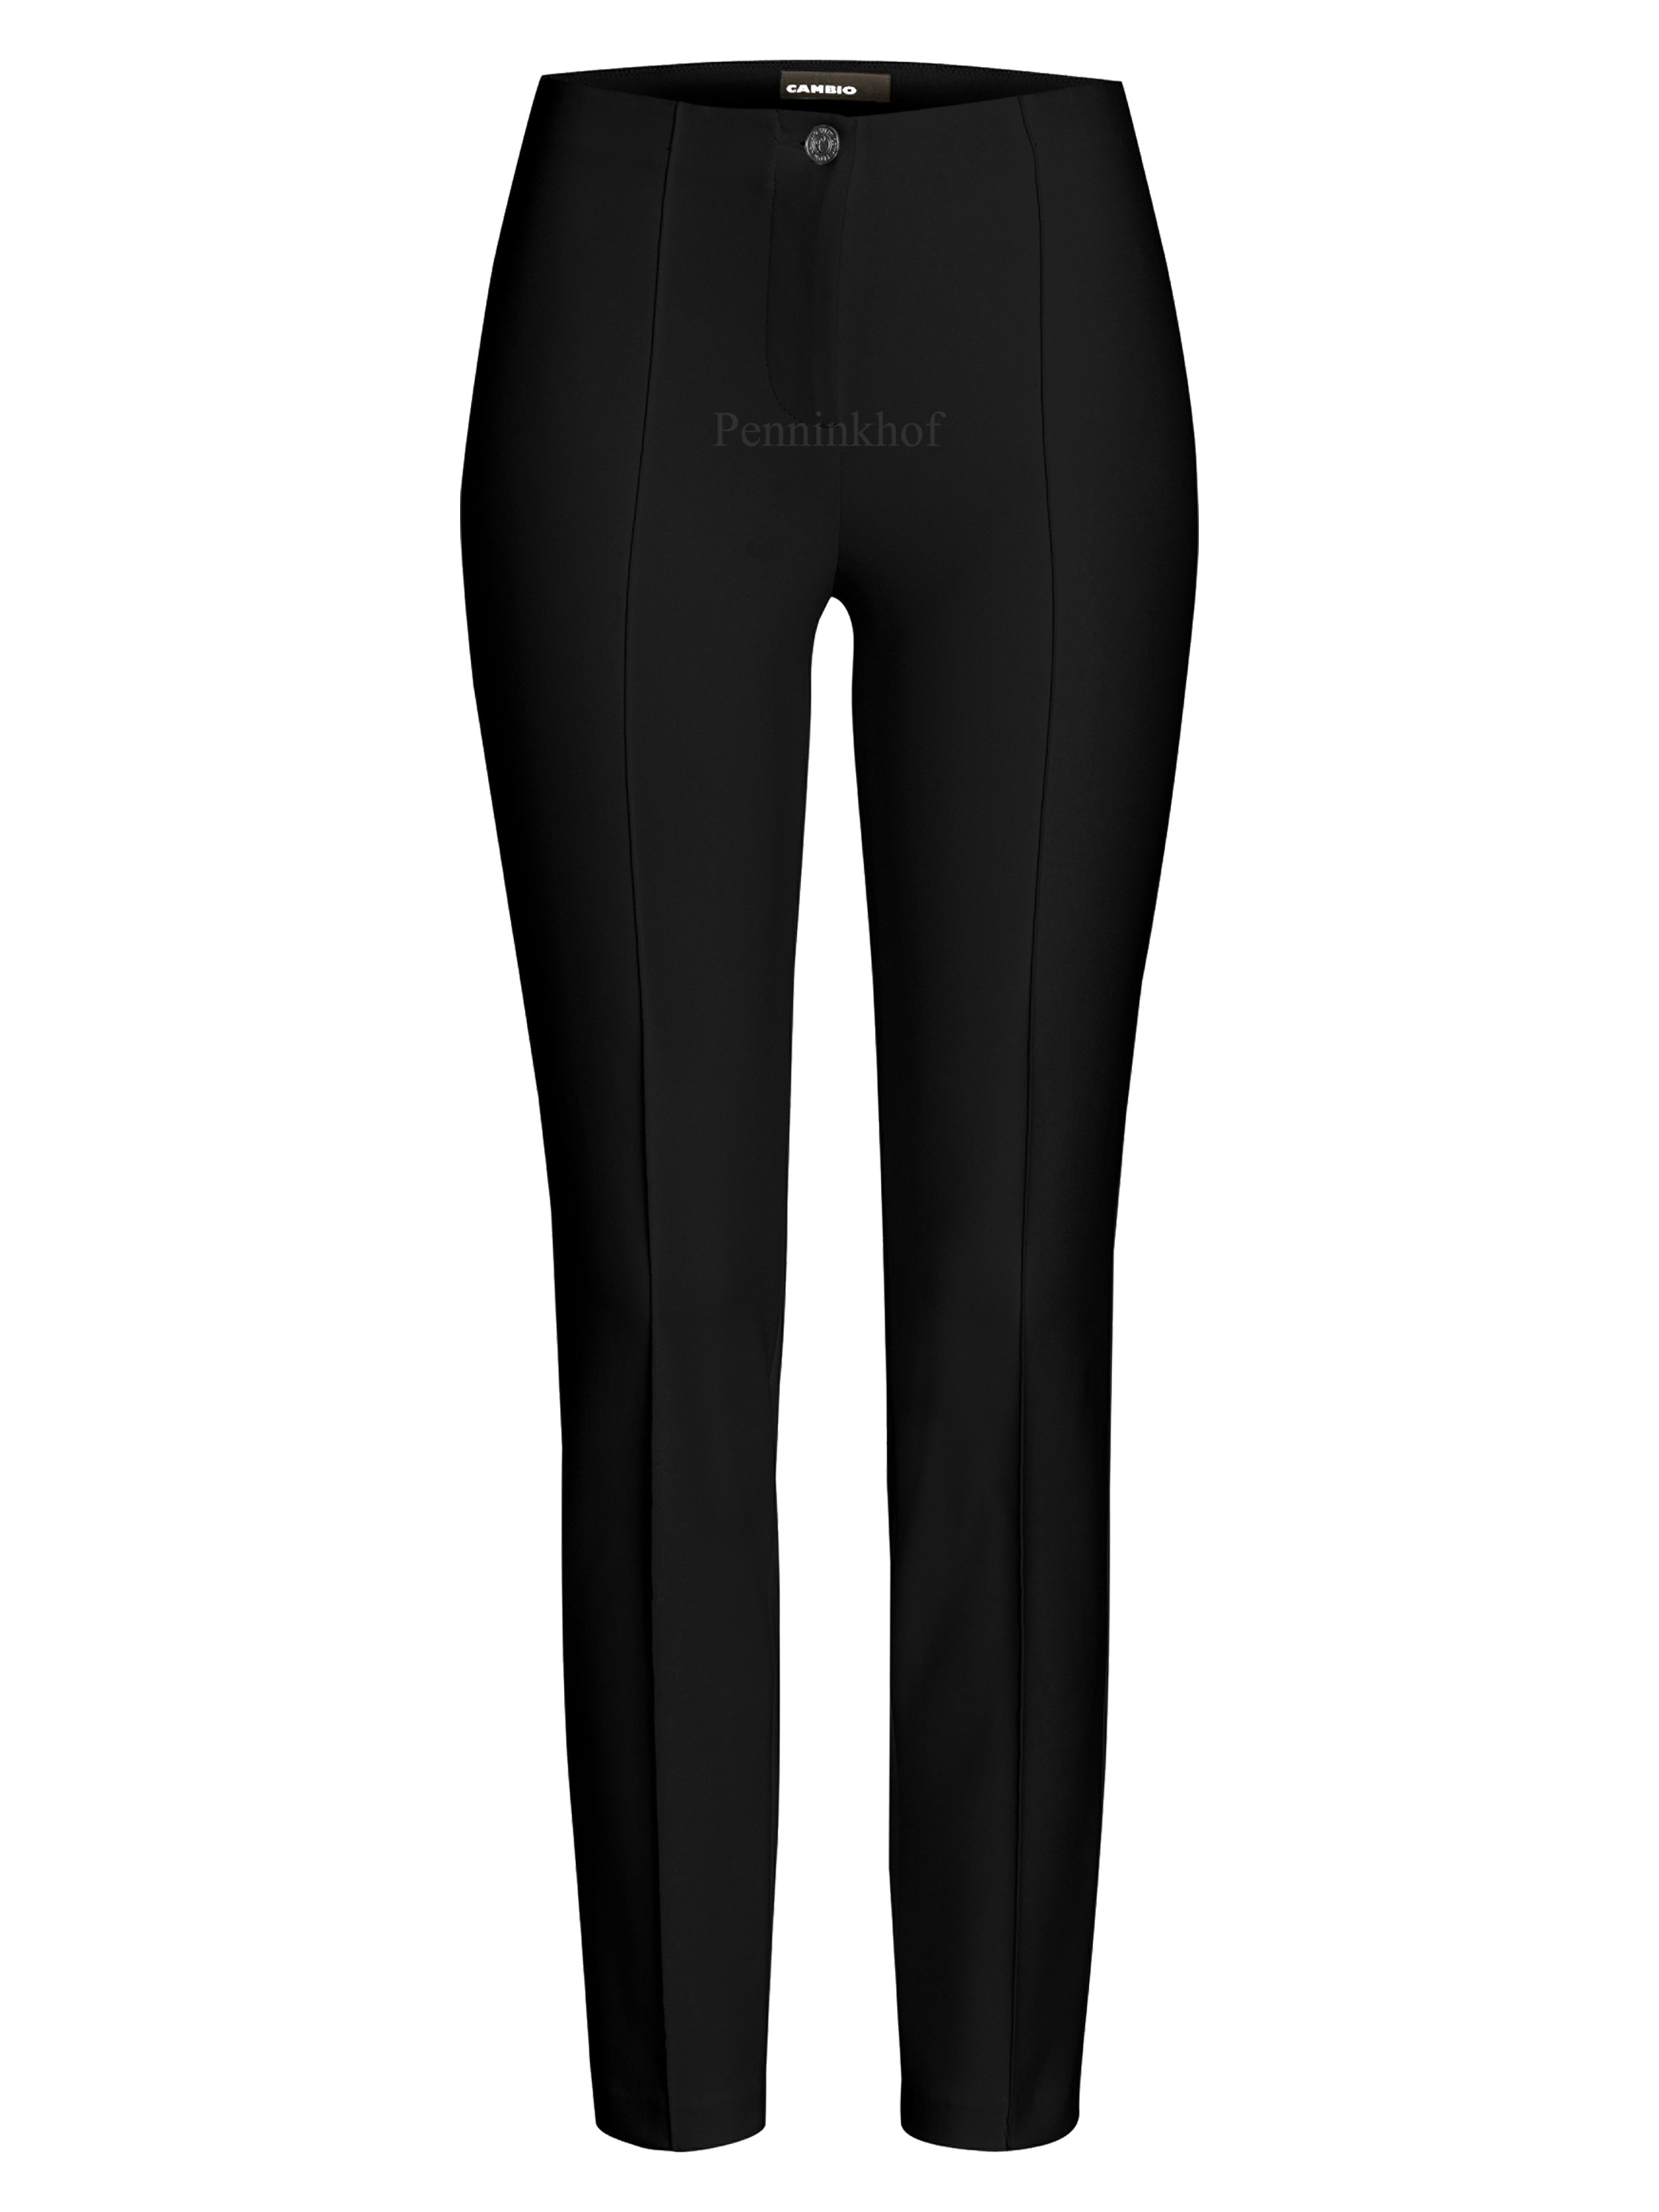 Cambio trousers ROS 6111 0202-00 Black by Penninkhoffashion.com